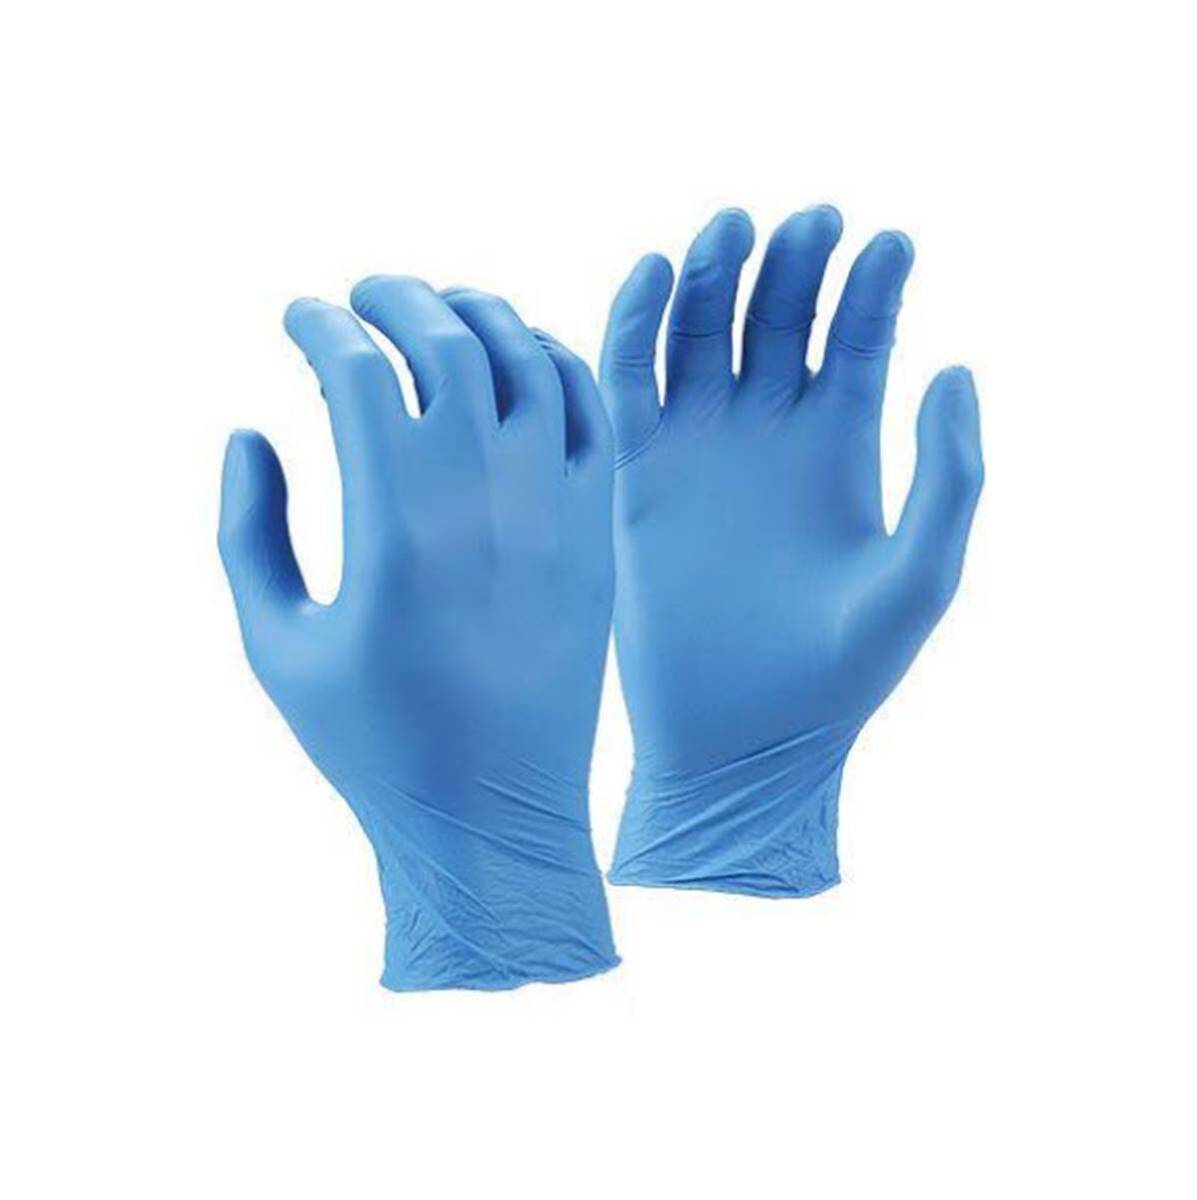 Disposable gloves for sale online